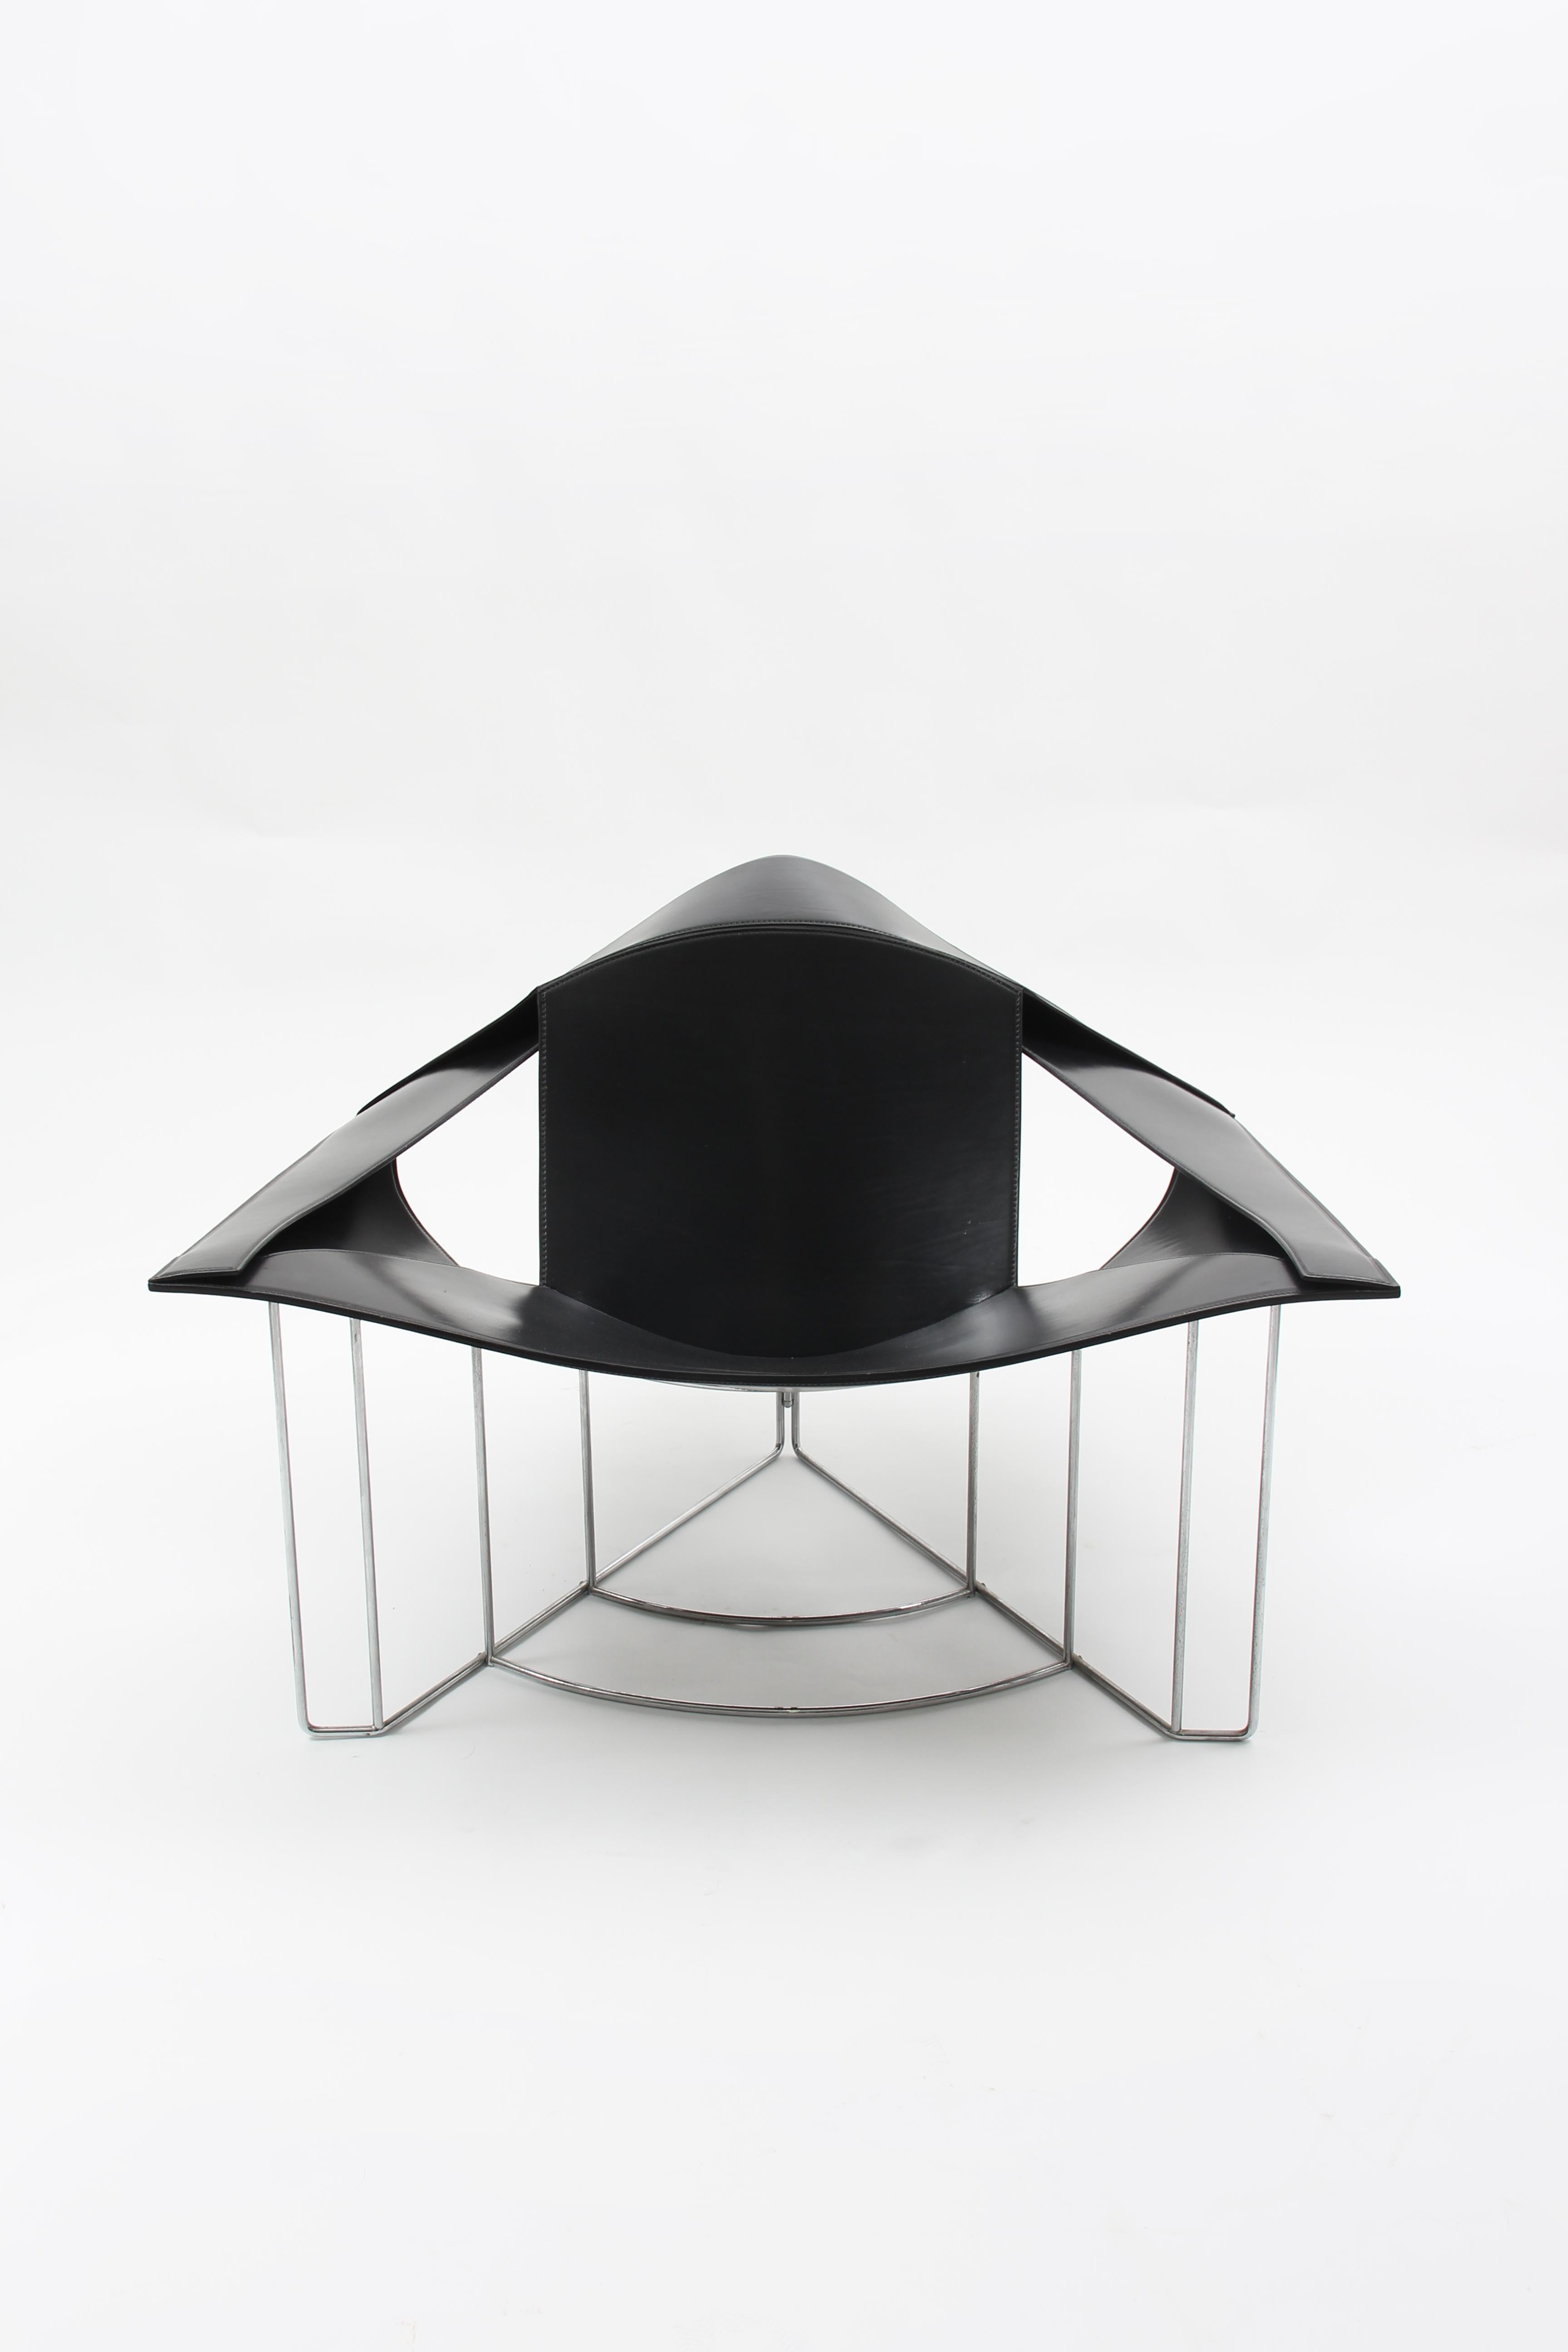 A very rare piece by Jacques Harold Pollard for Matteo Grassi, 1987.
Stunning statement architectural piece, from every angle!